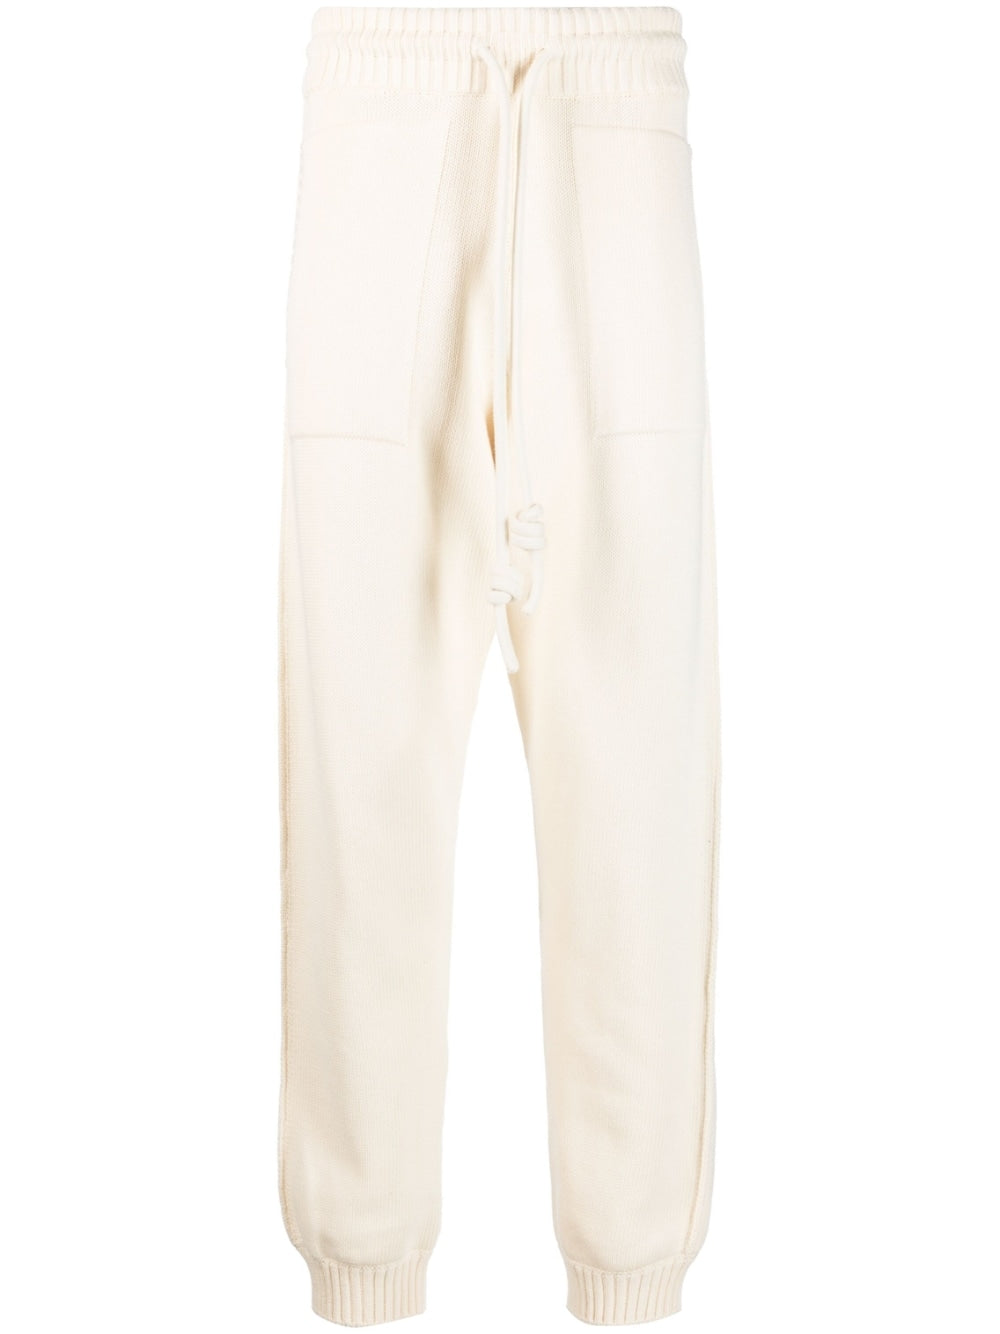 Off White Trousers Beige-Off White-Urbanheer